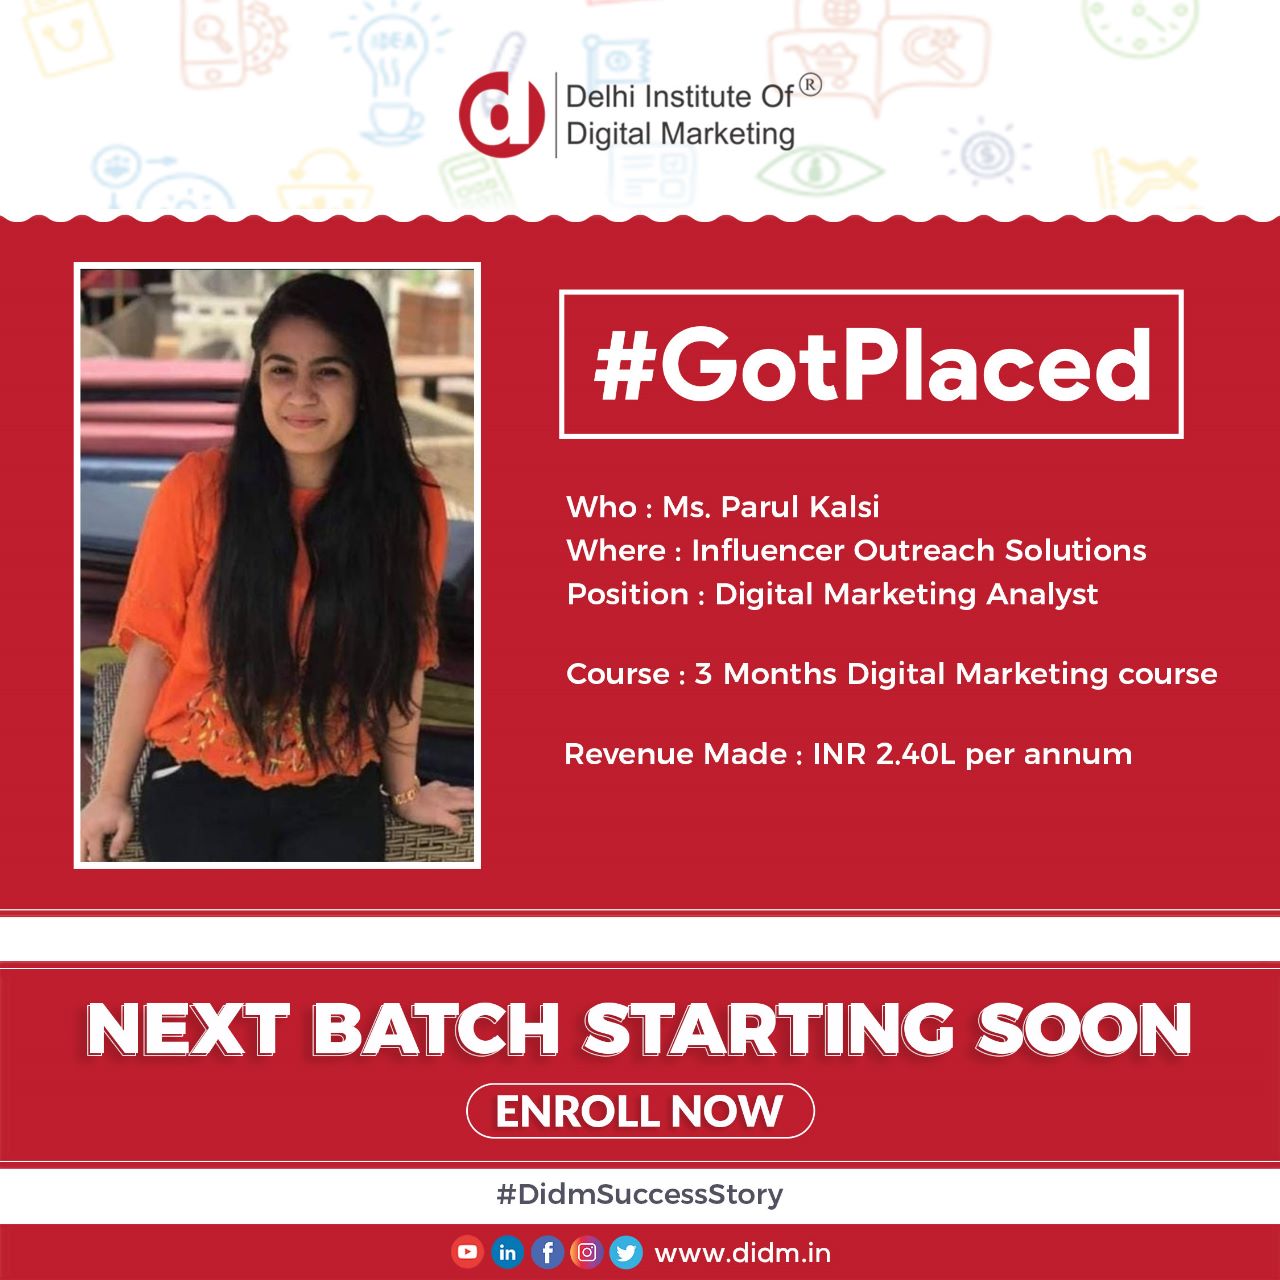 DIDM Student Ms. Parul Kalsi Got Placed in Digital Marketing Analysis